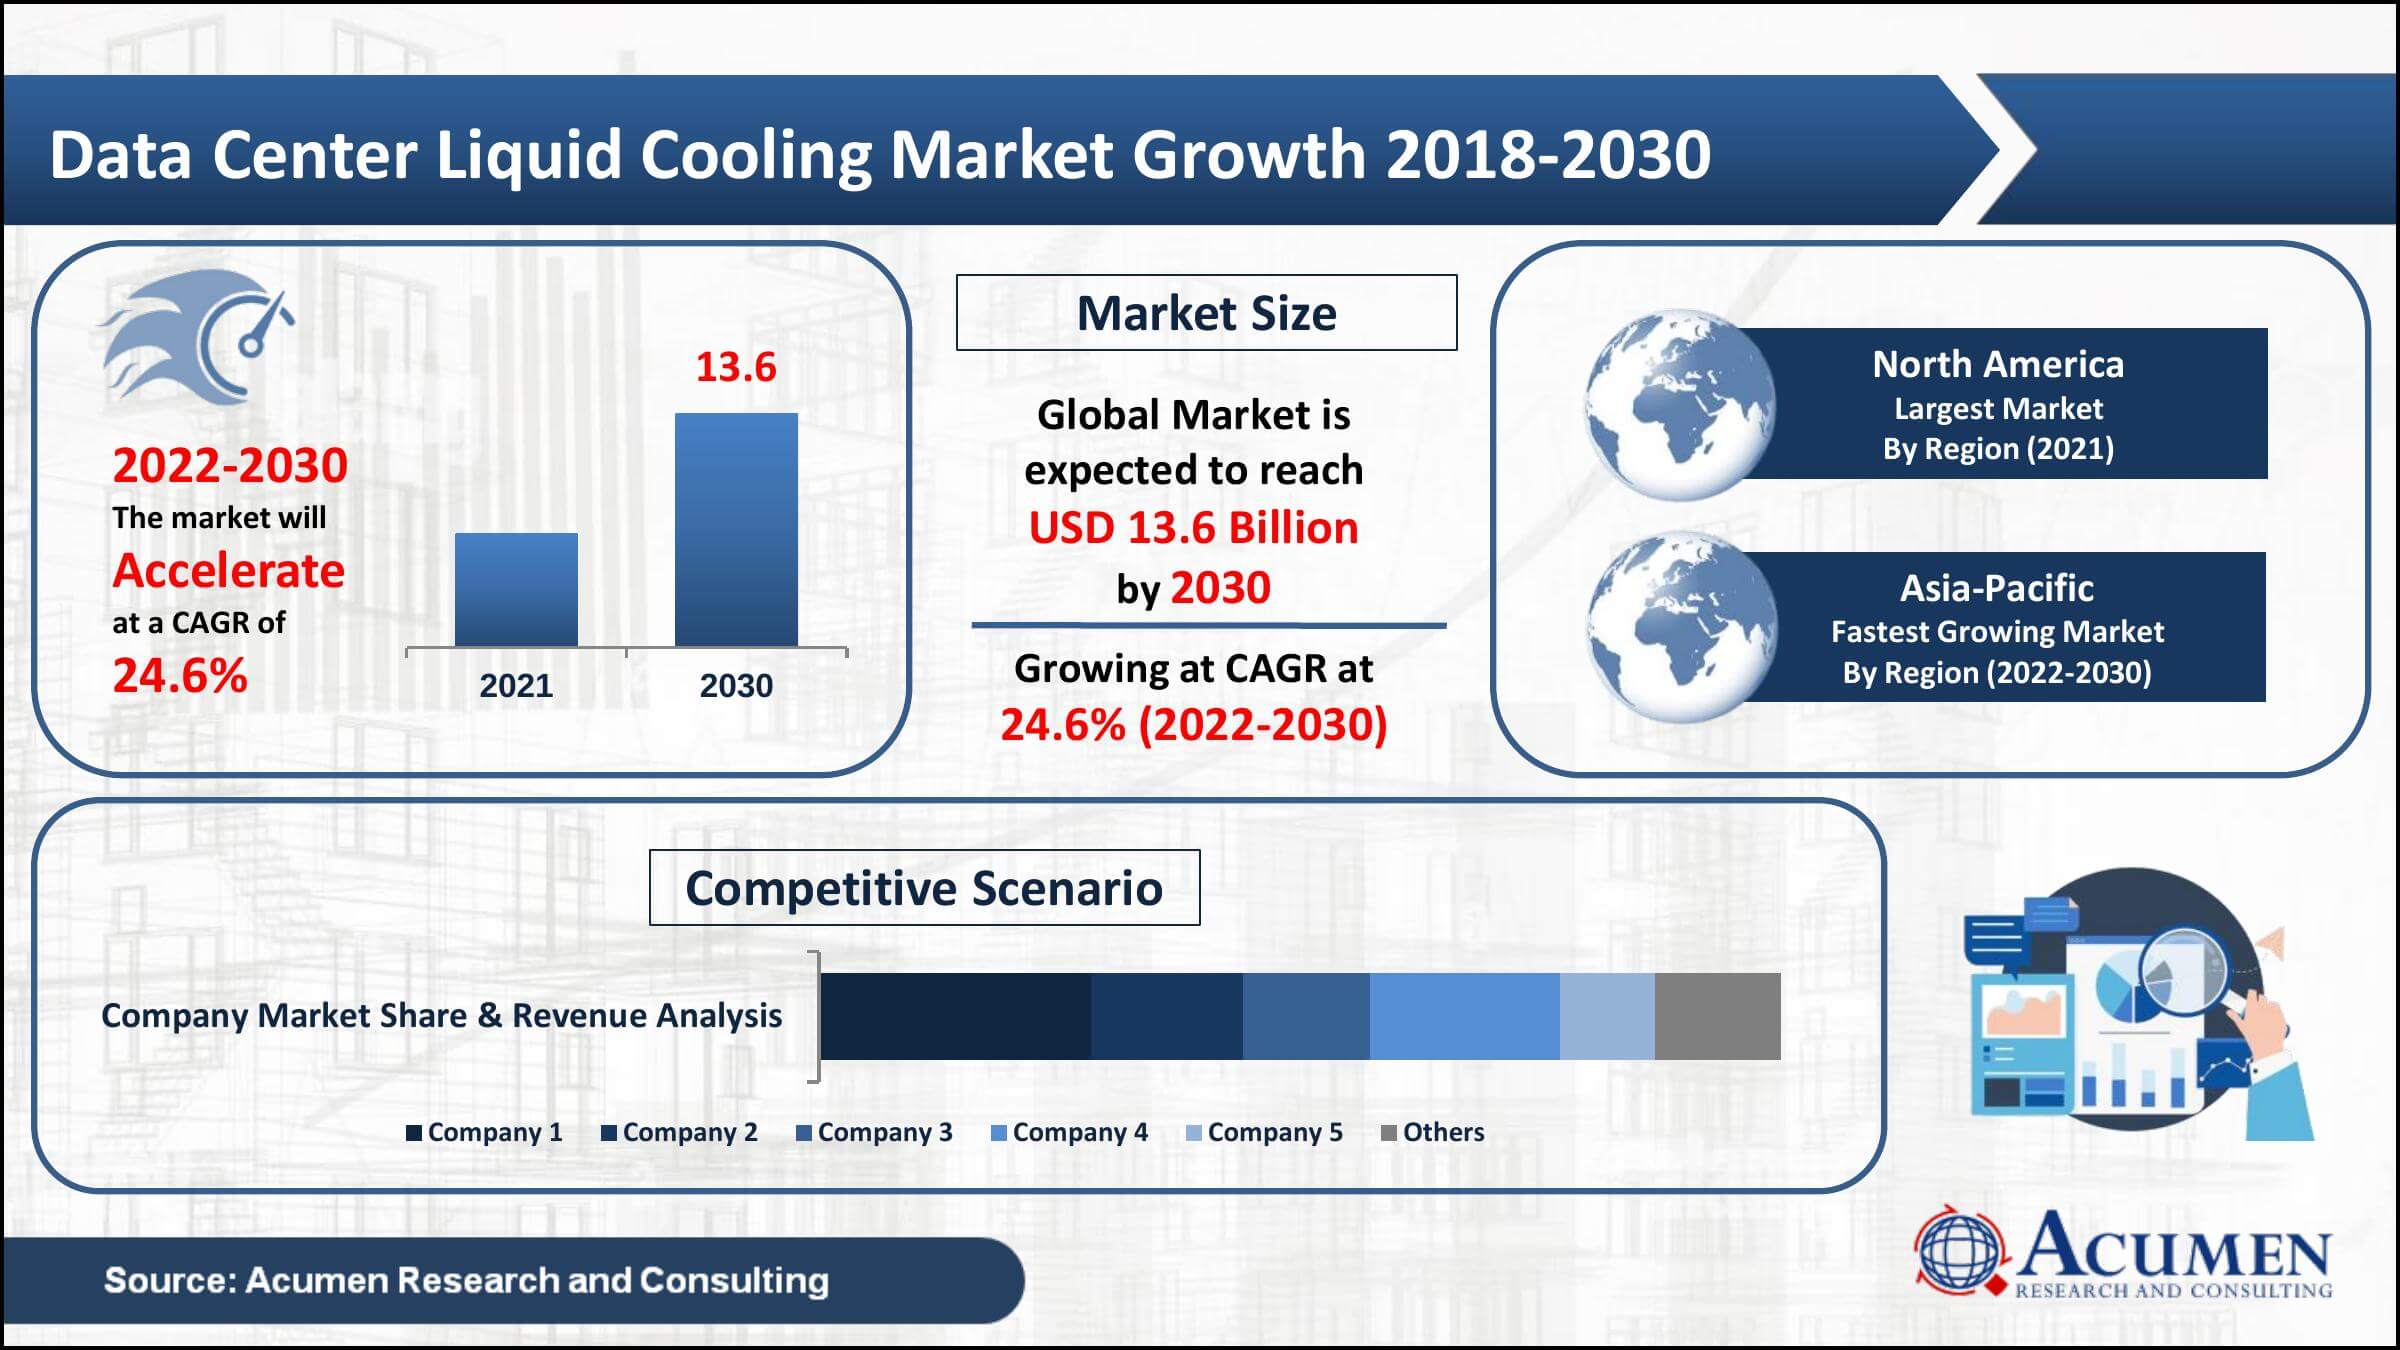 Global data center liquid cooling market revenue collected USD 1.9 Billion in 2021, with a 24.6% CAGR between 2022 and 2030